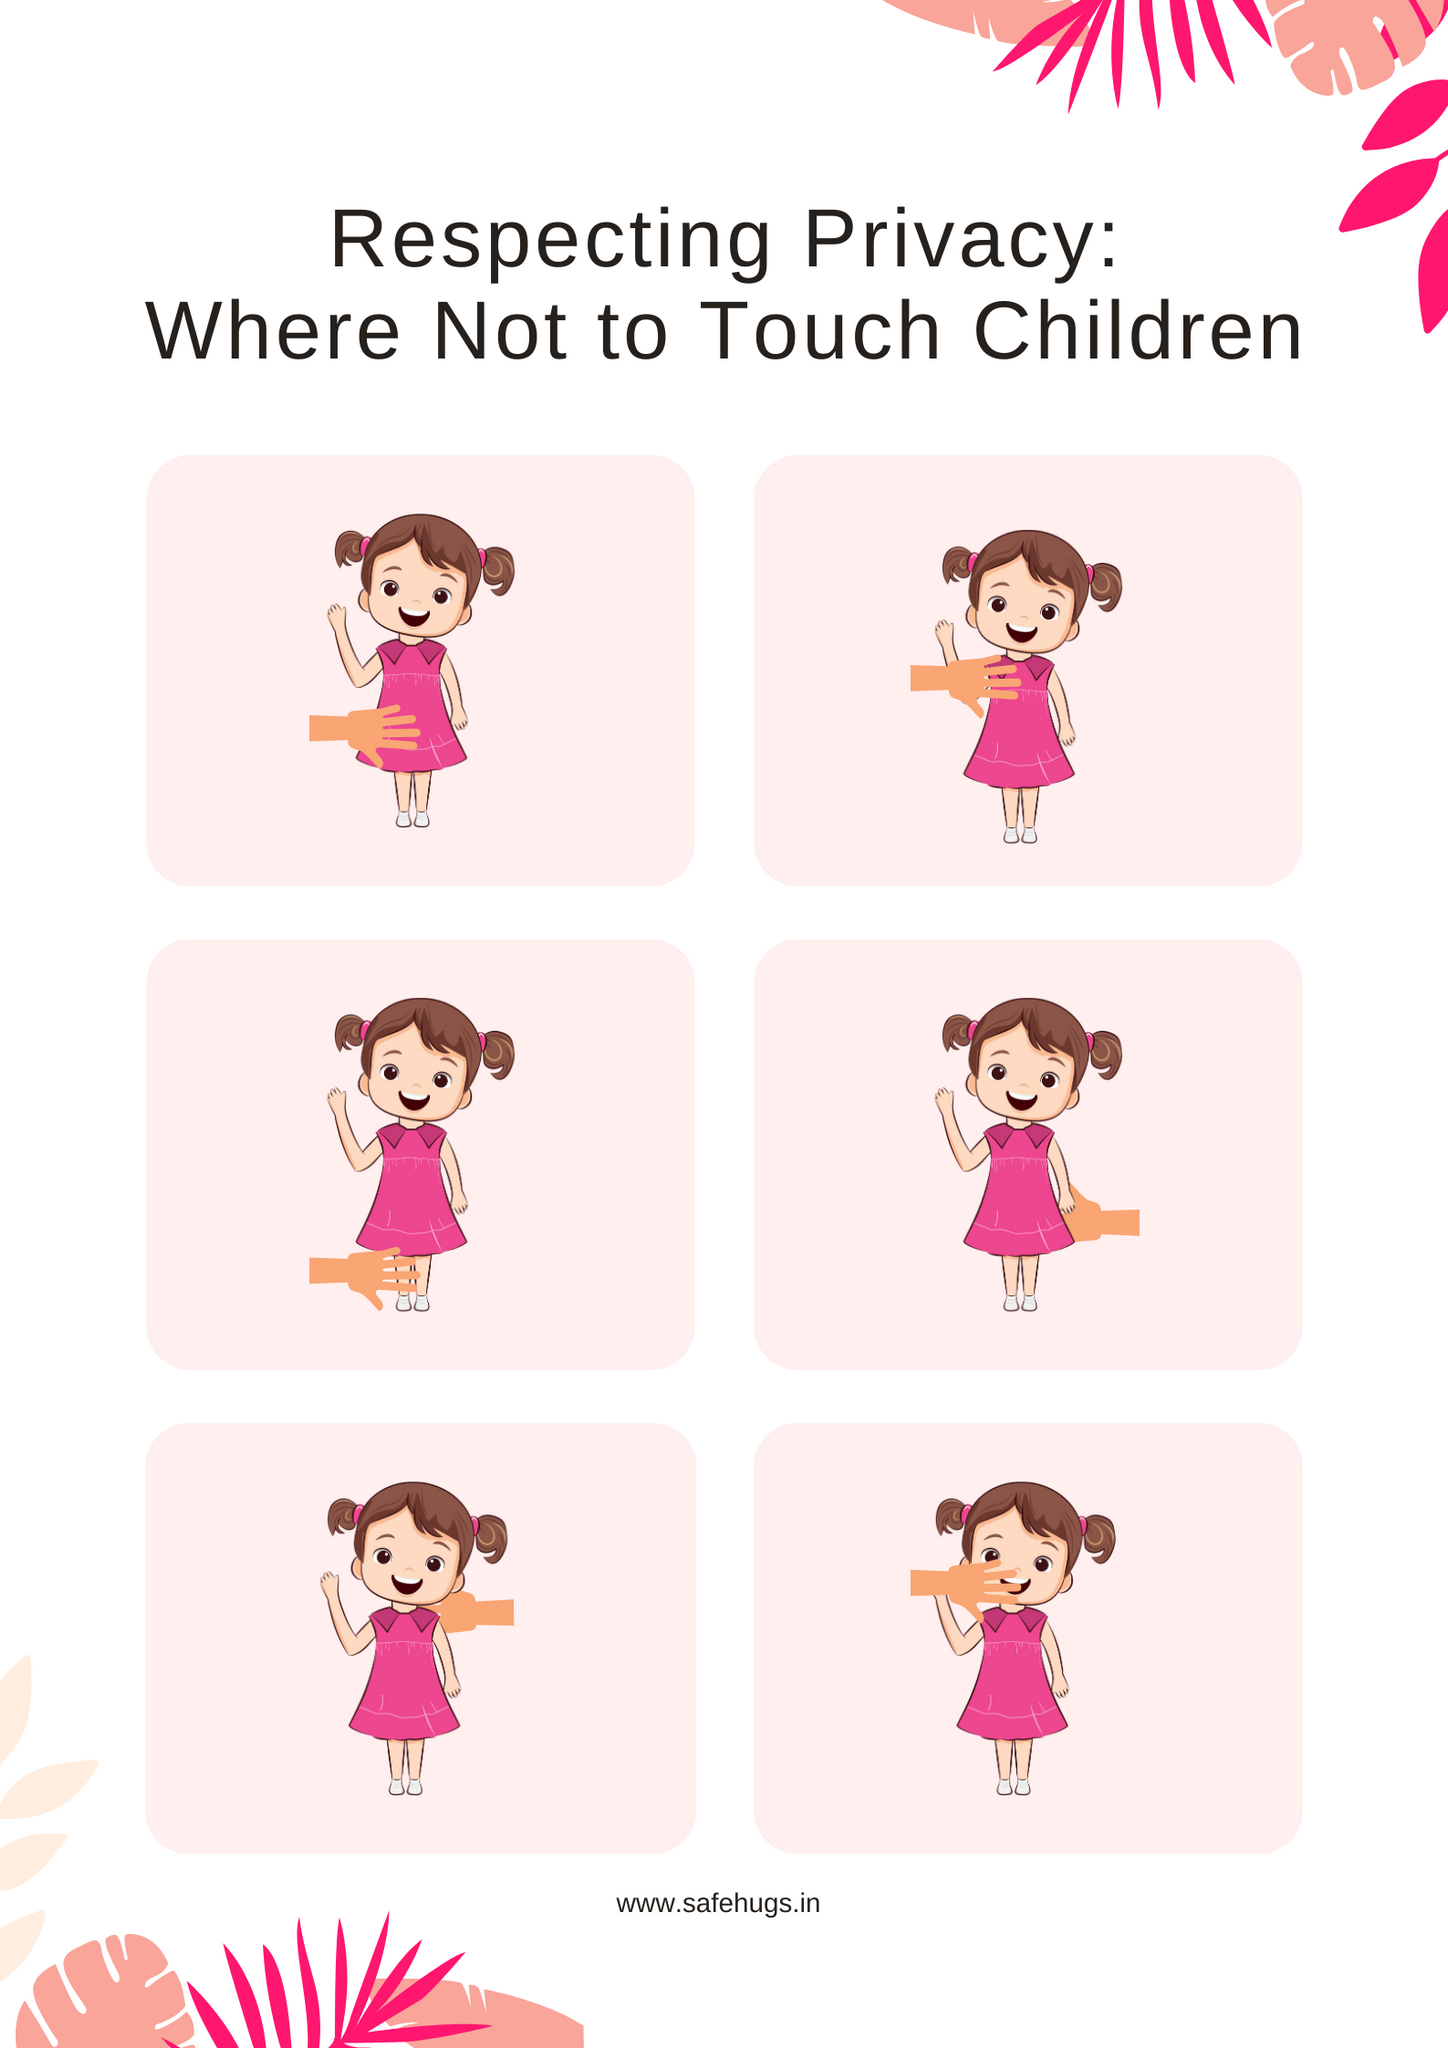 Explaining the inappropriate places of child one cannot touch.